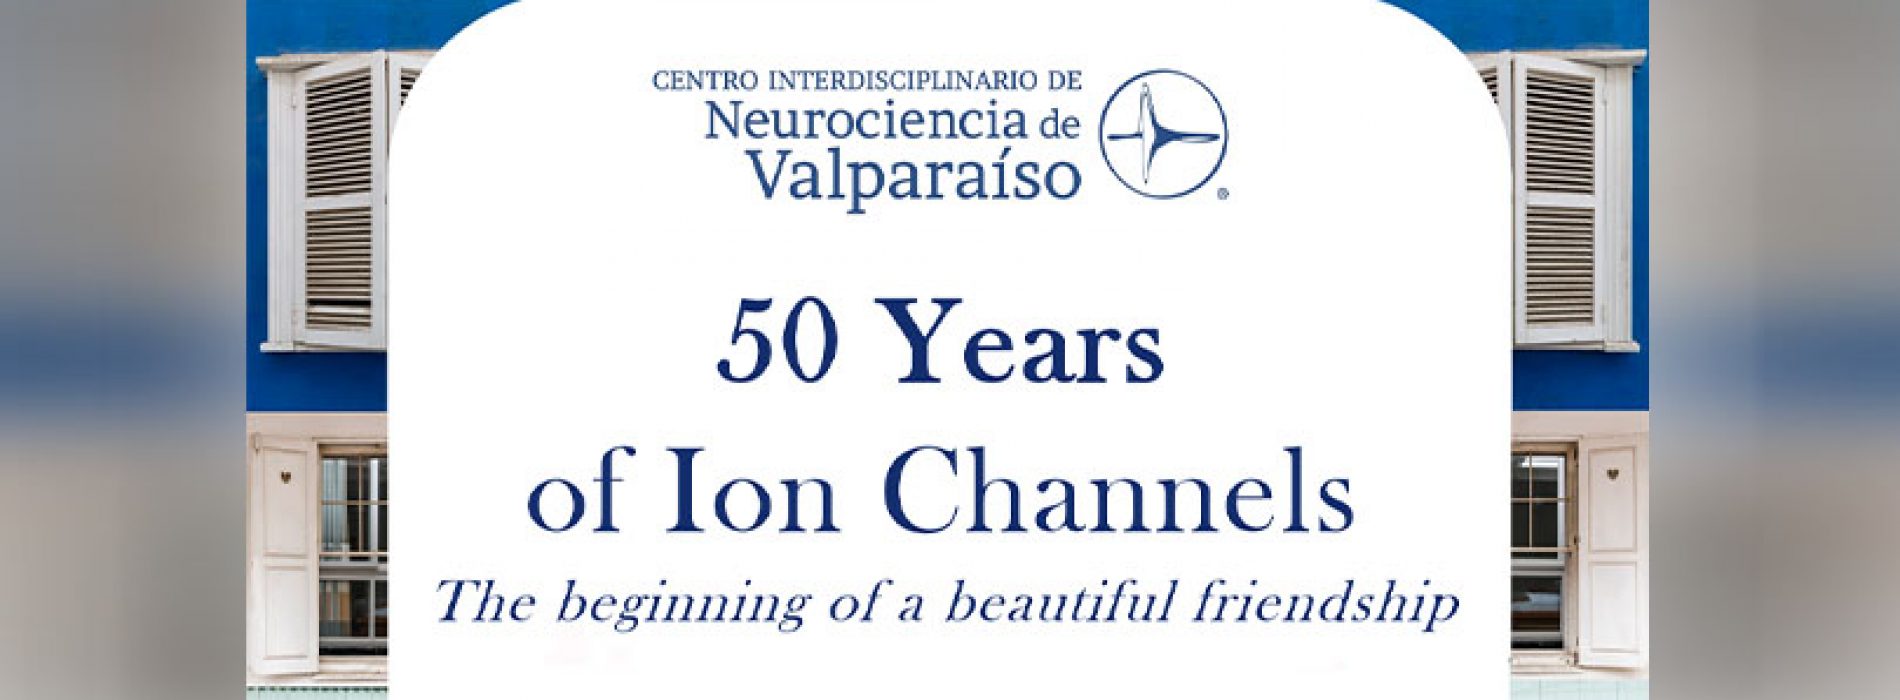 Symposium: 50 Years of Ion Channels